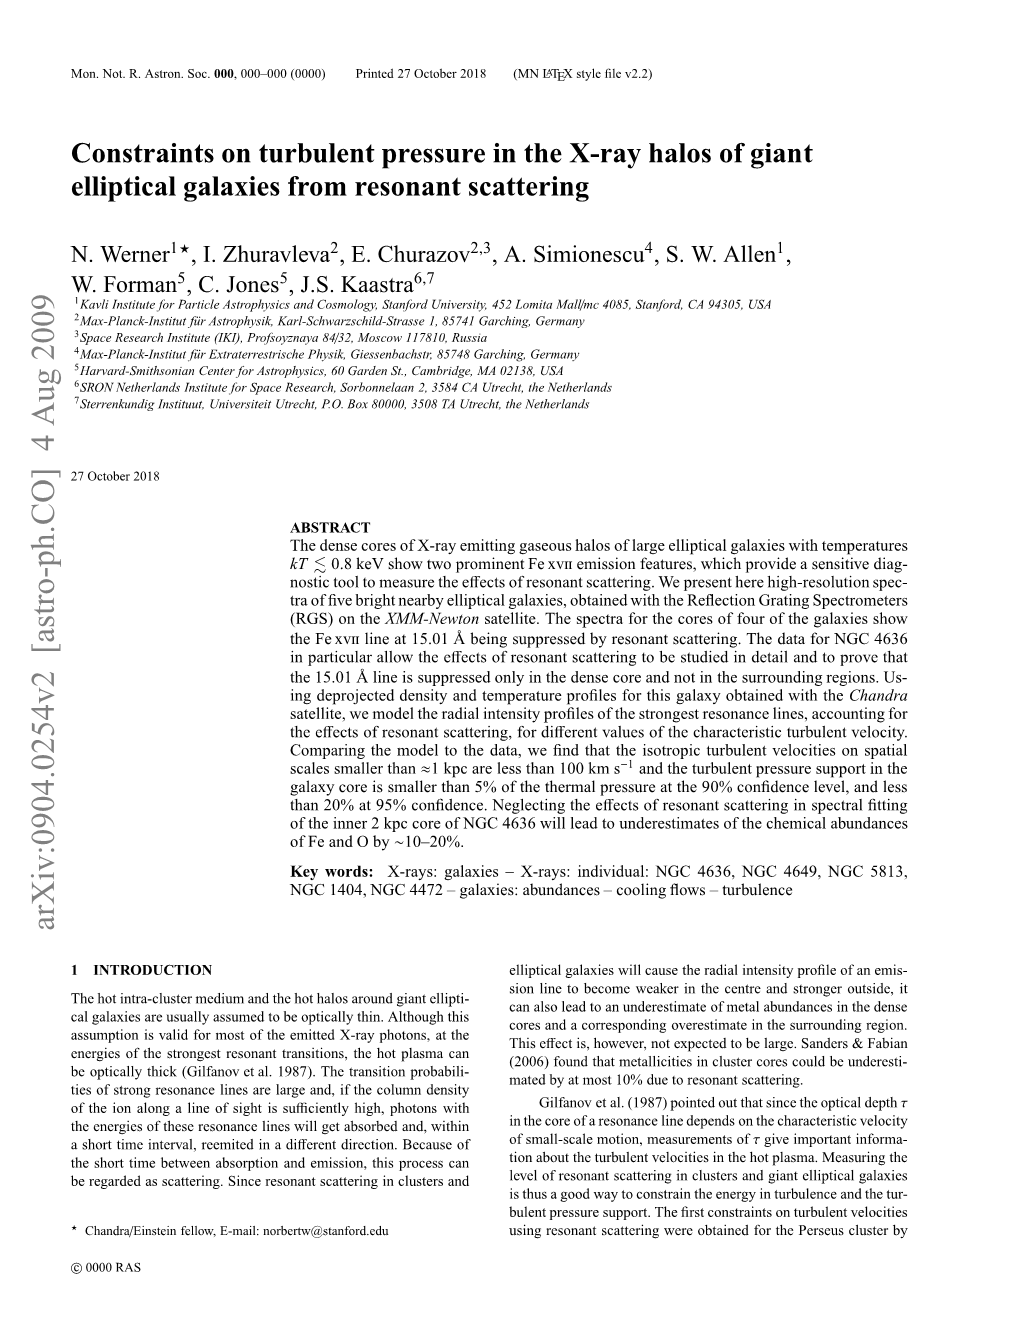 Constraints on Turbulent Pressure in the X-Ray Halos of Giant Elliptical Galaxies 3